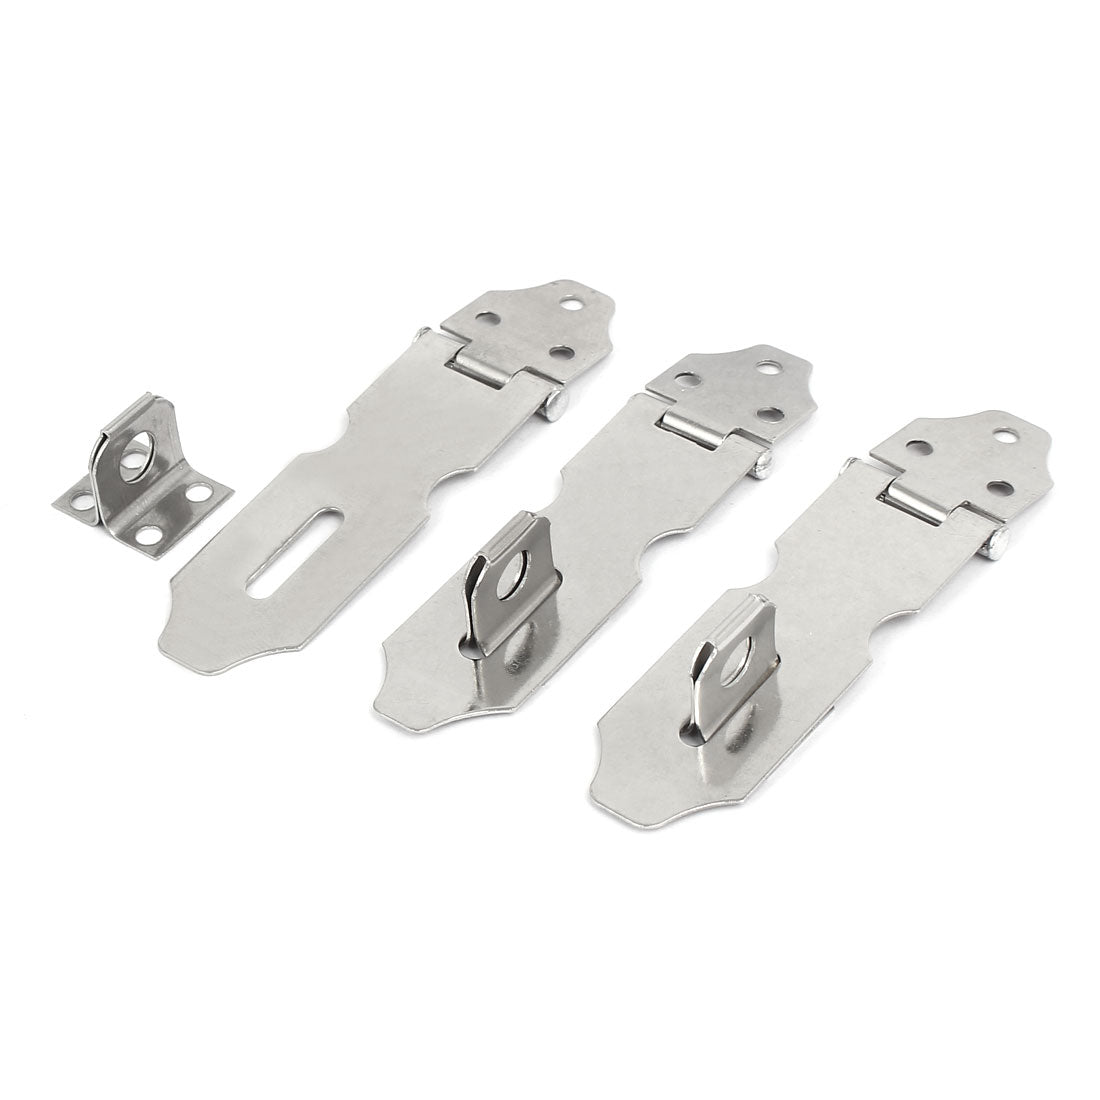 uxcell Uxcell Cupboard Stainless Steel Safety Padlock Door Latch Lock Hasp Staples 2.5" 3pcs